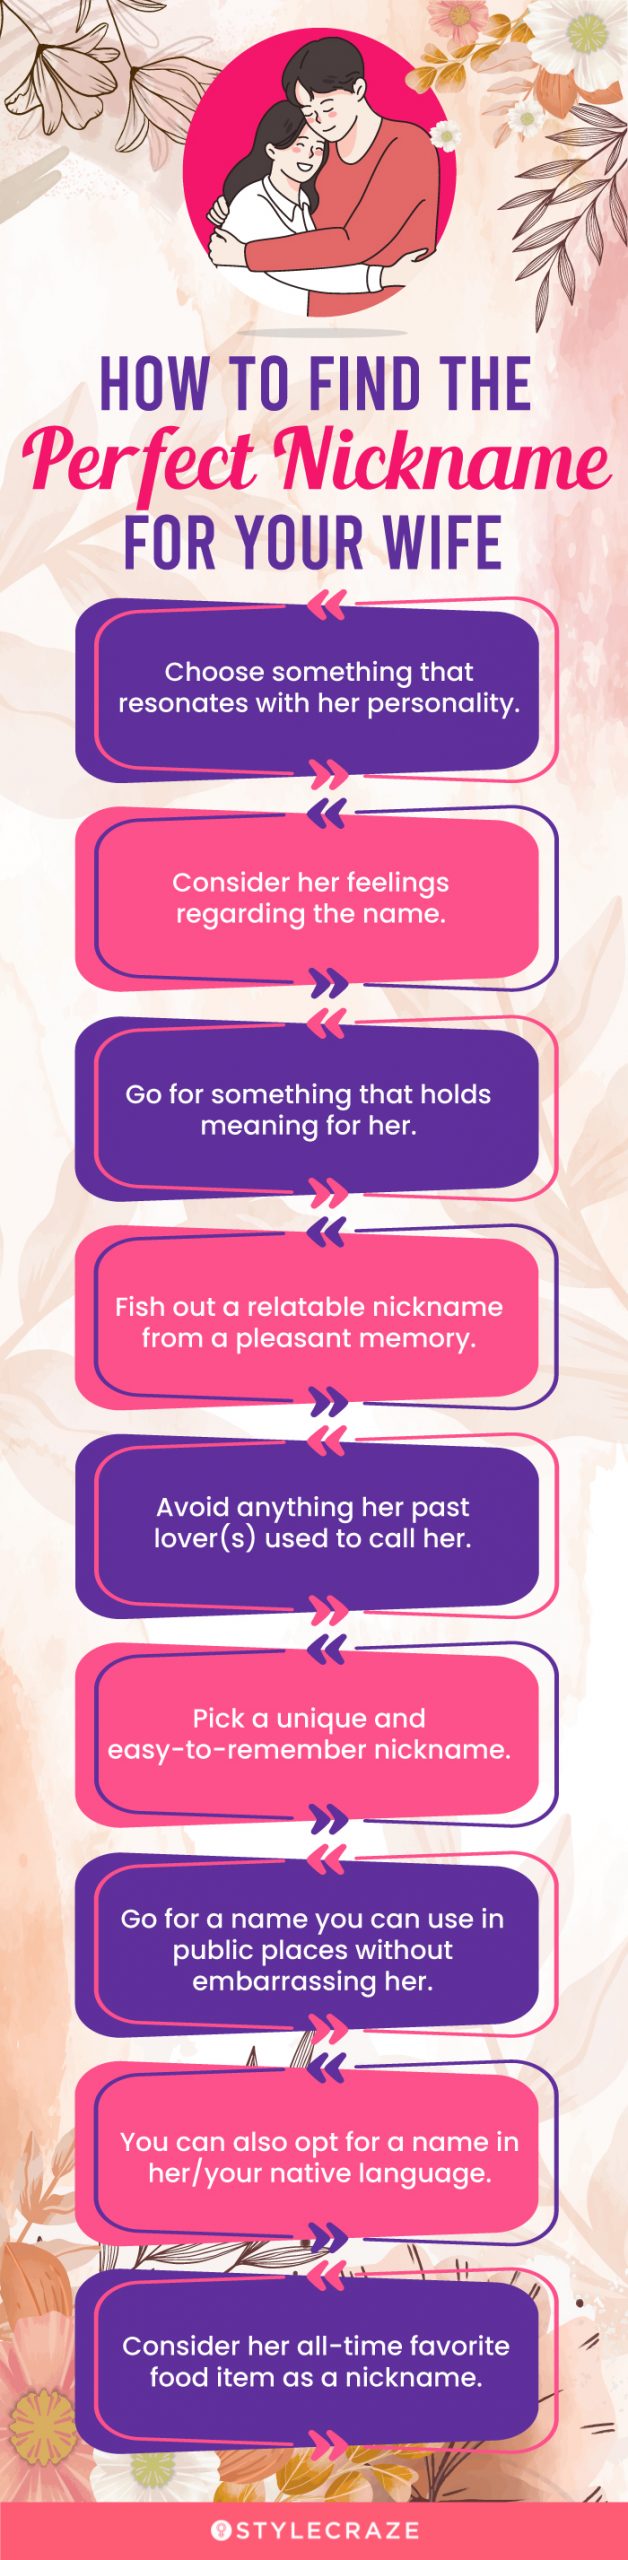 how to find the perfect nickname for your wife (infographic)